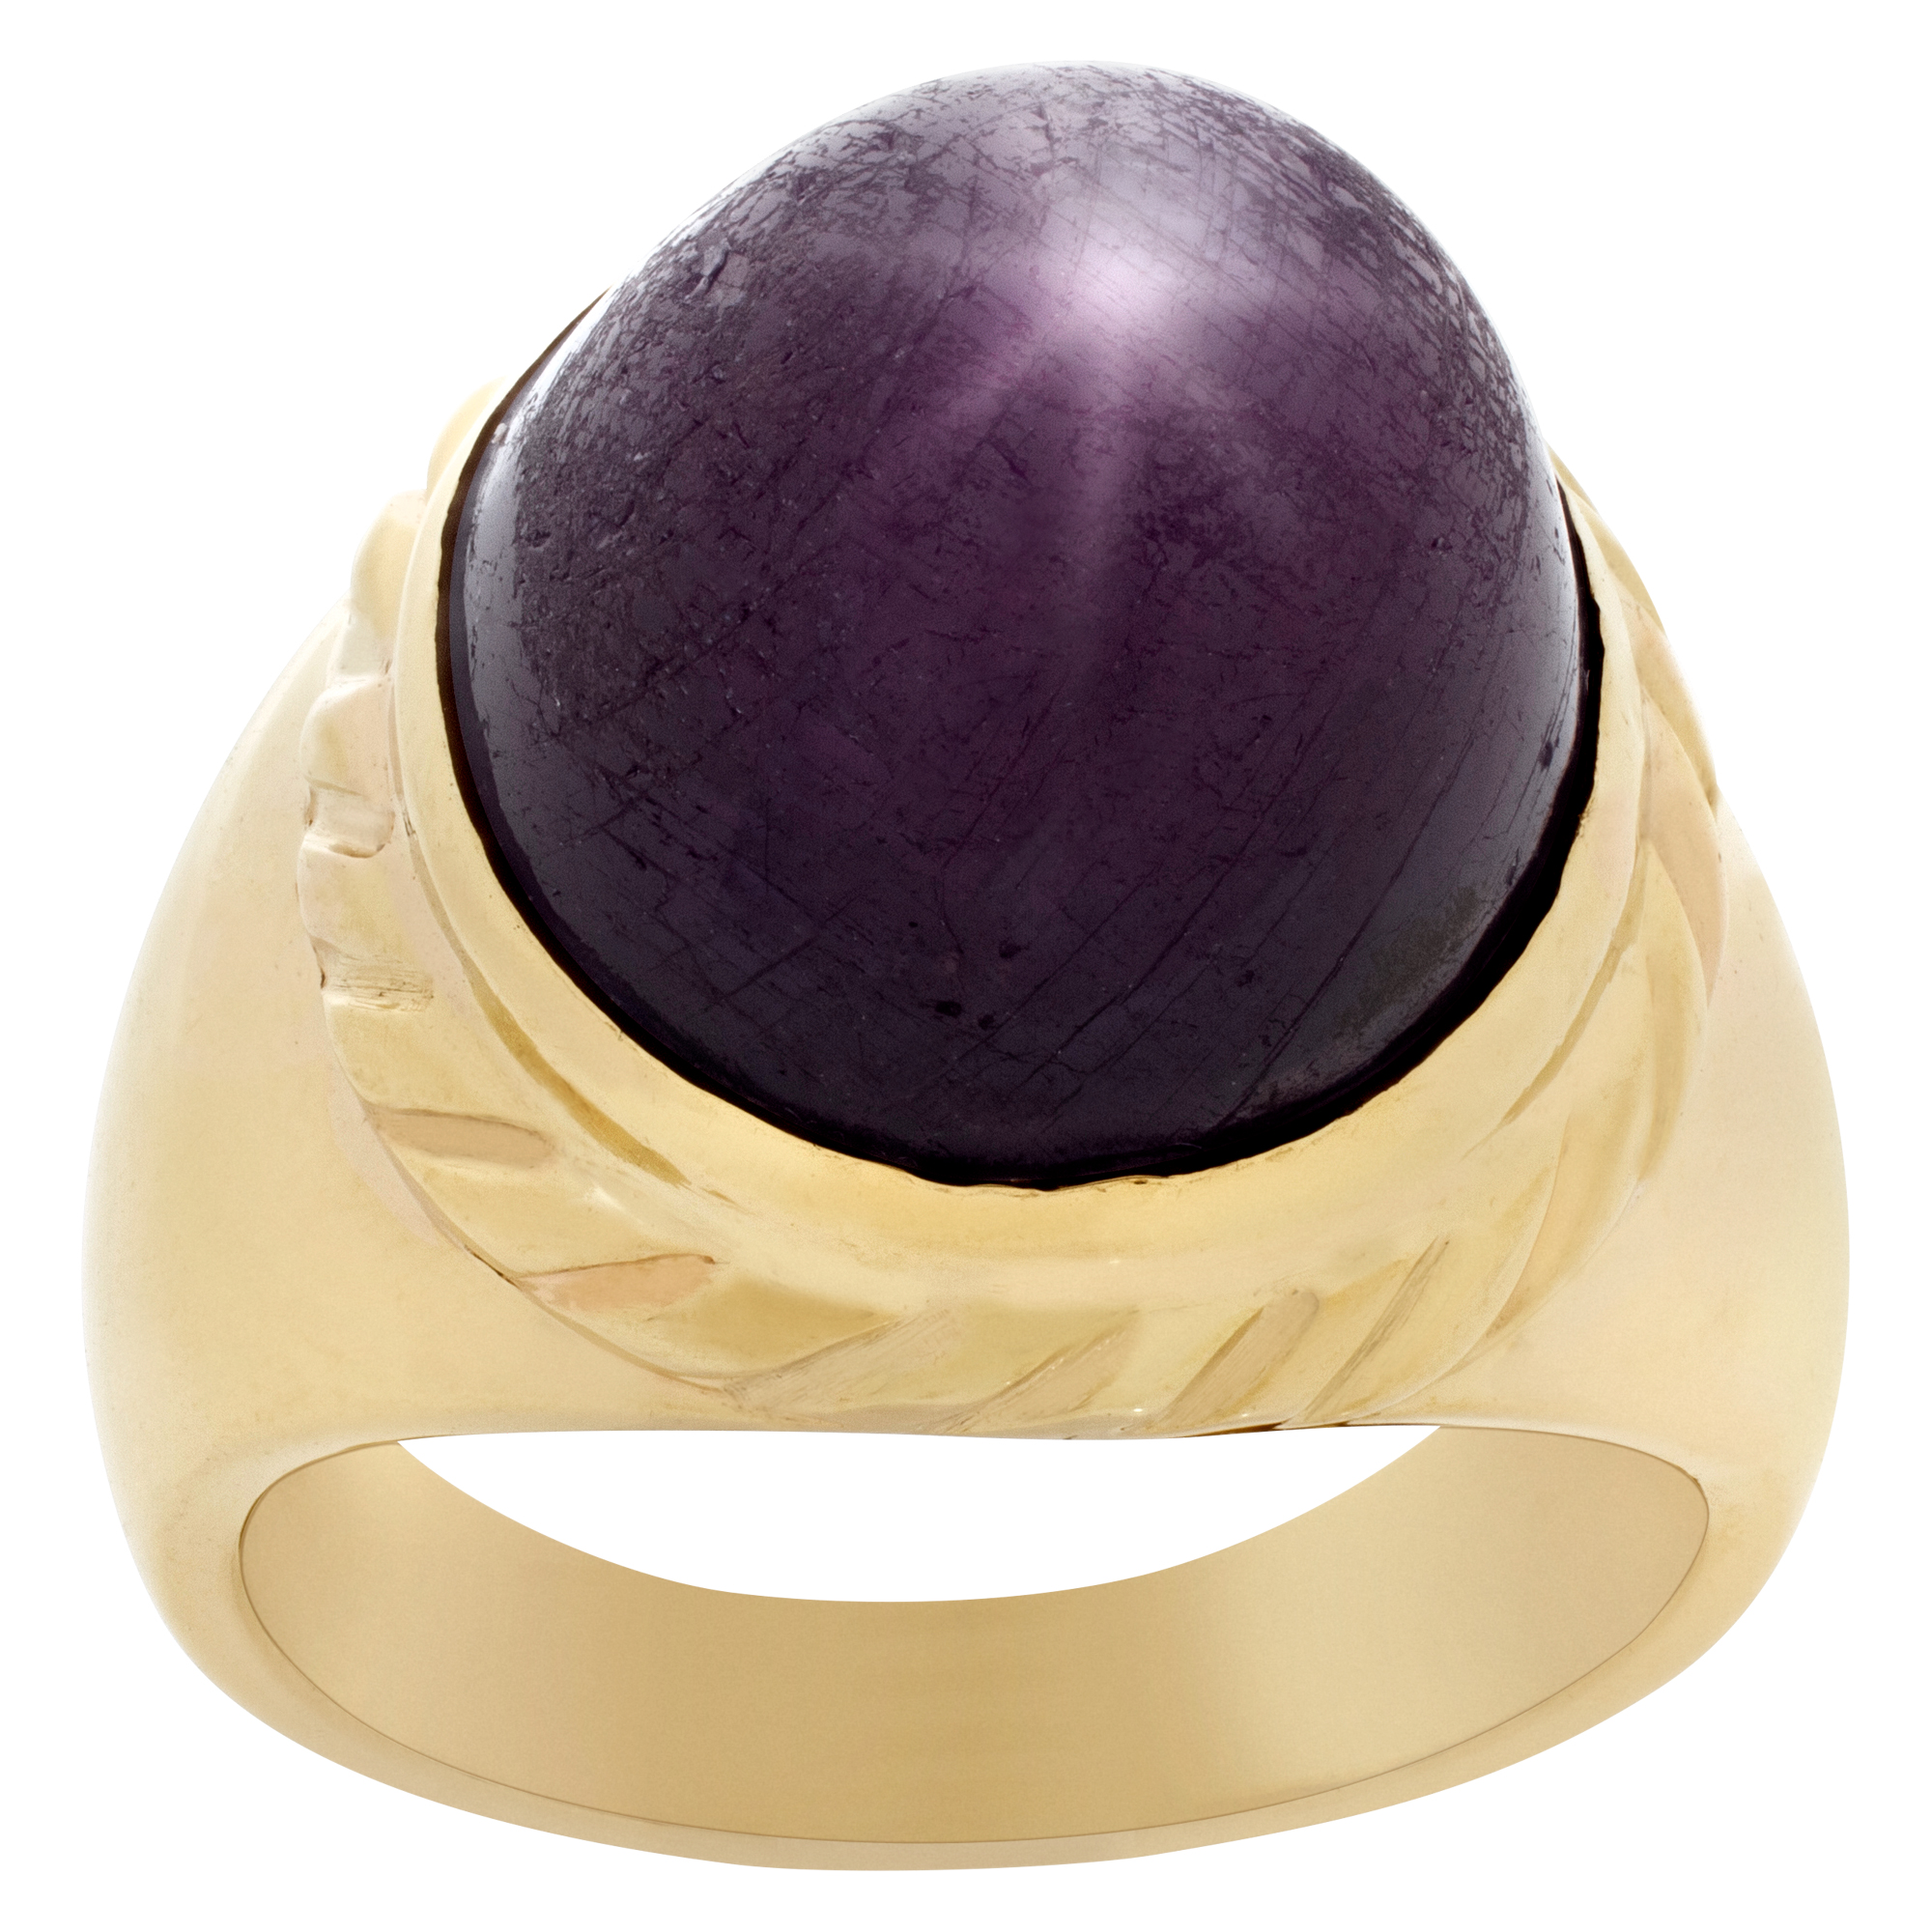 Cabochon star ruby ring in 14k yellow gold, total approx. weight: over 10 carats. image 1